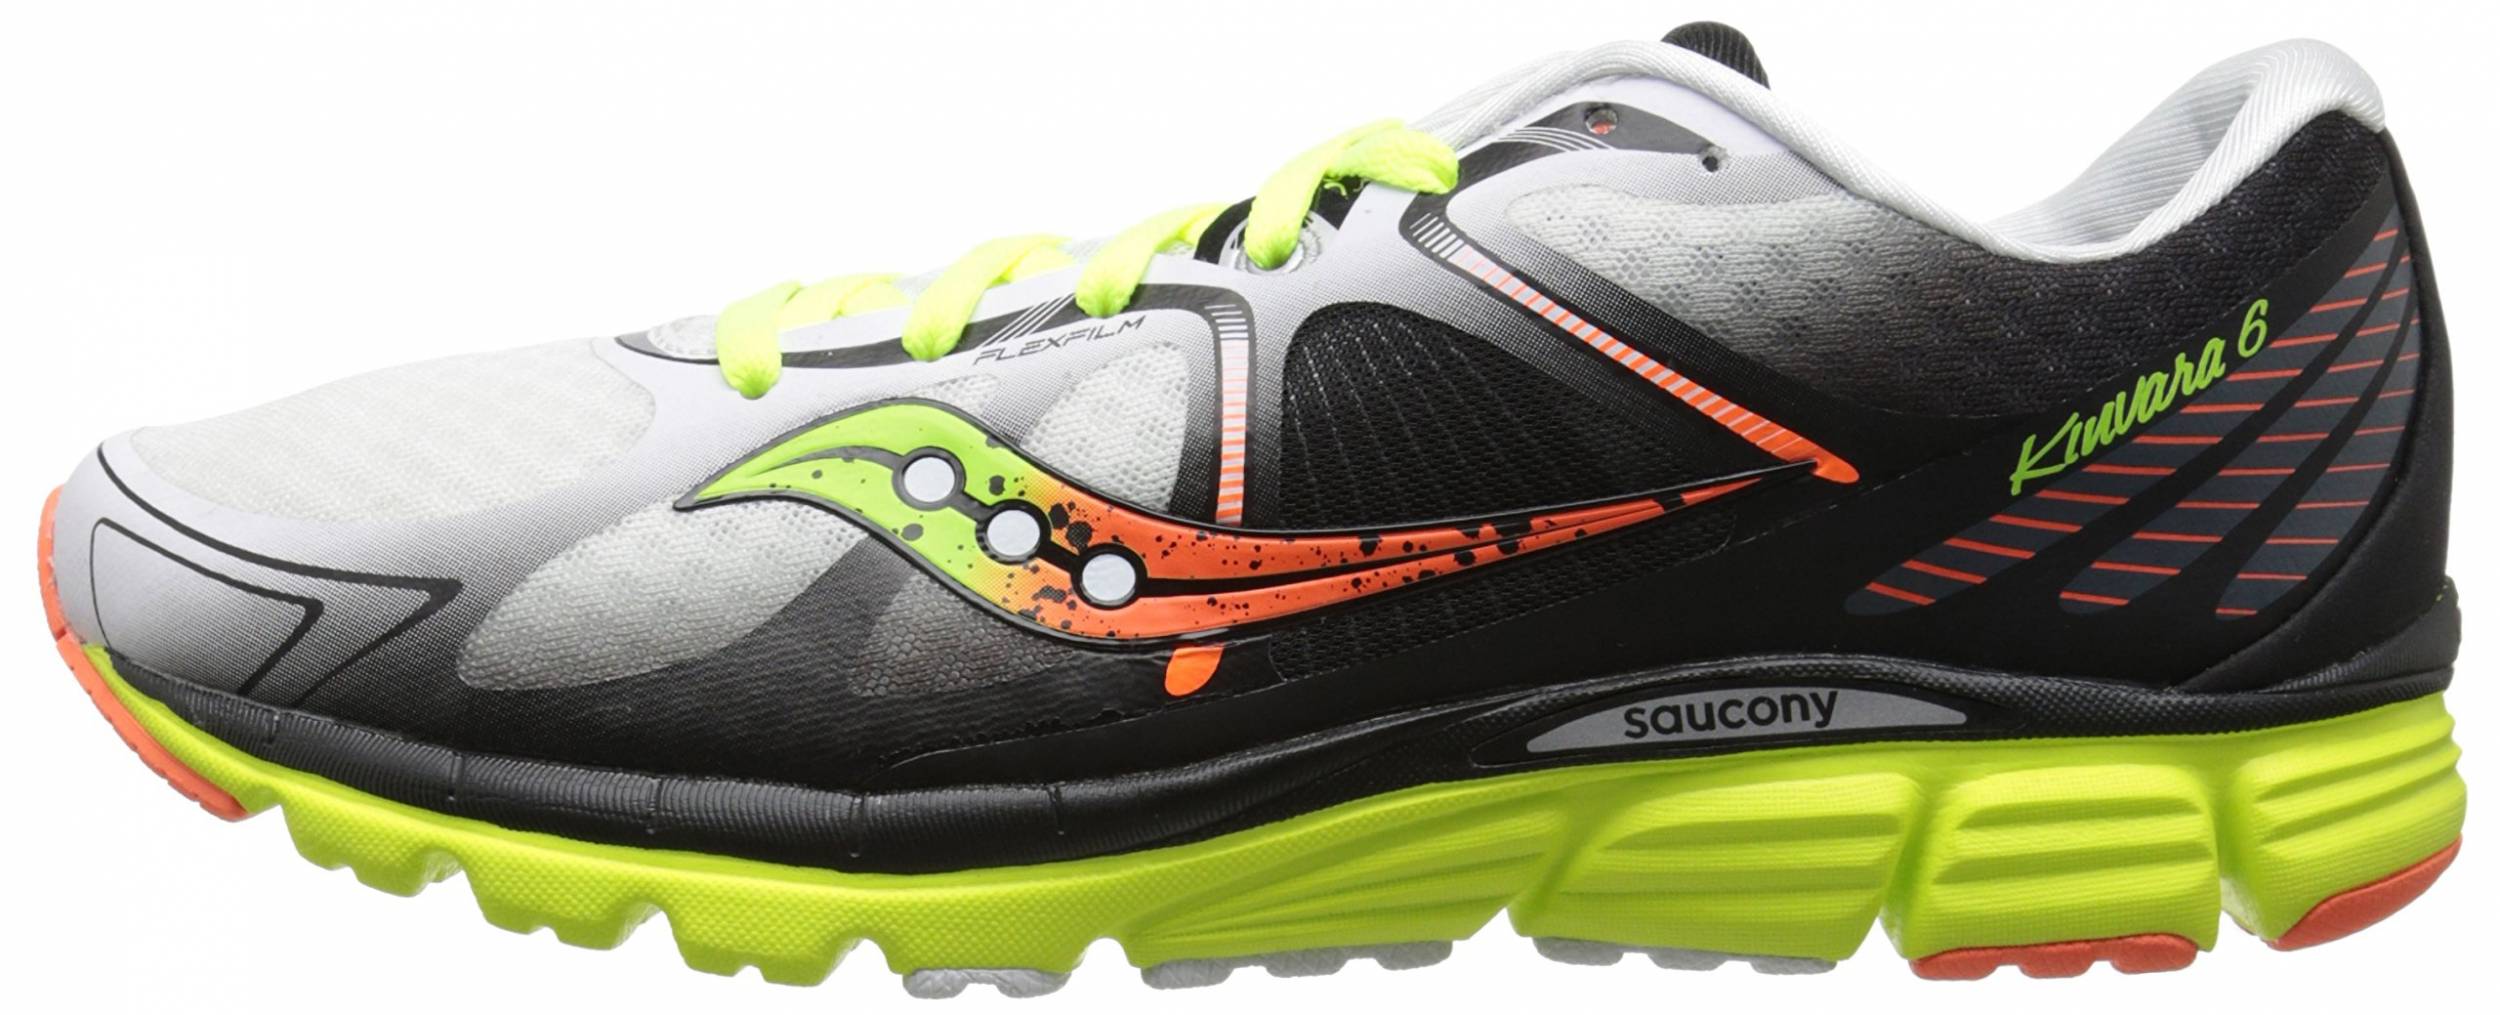 Only $80 + Review of Saucony Kinvara 6 | RunRepeat